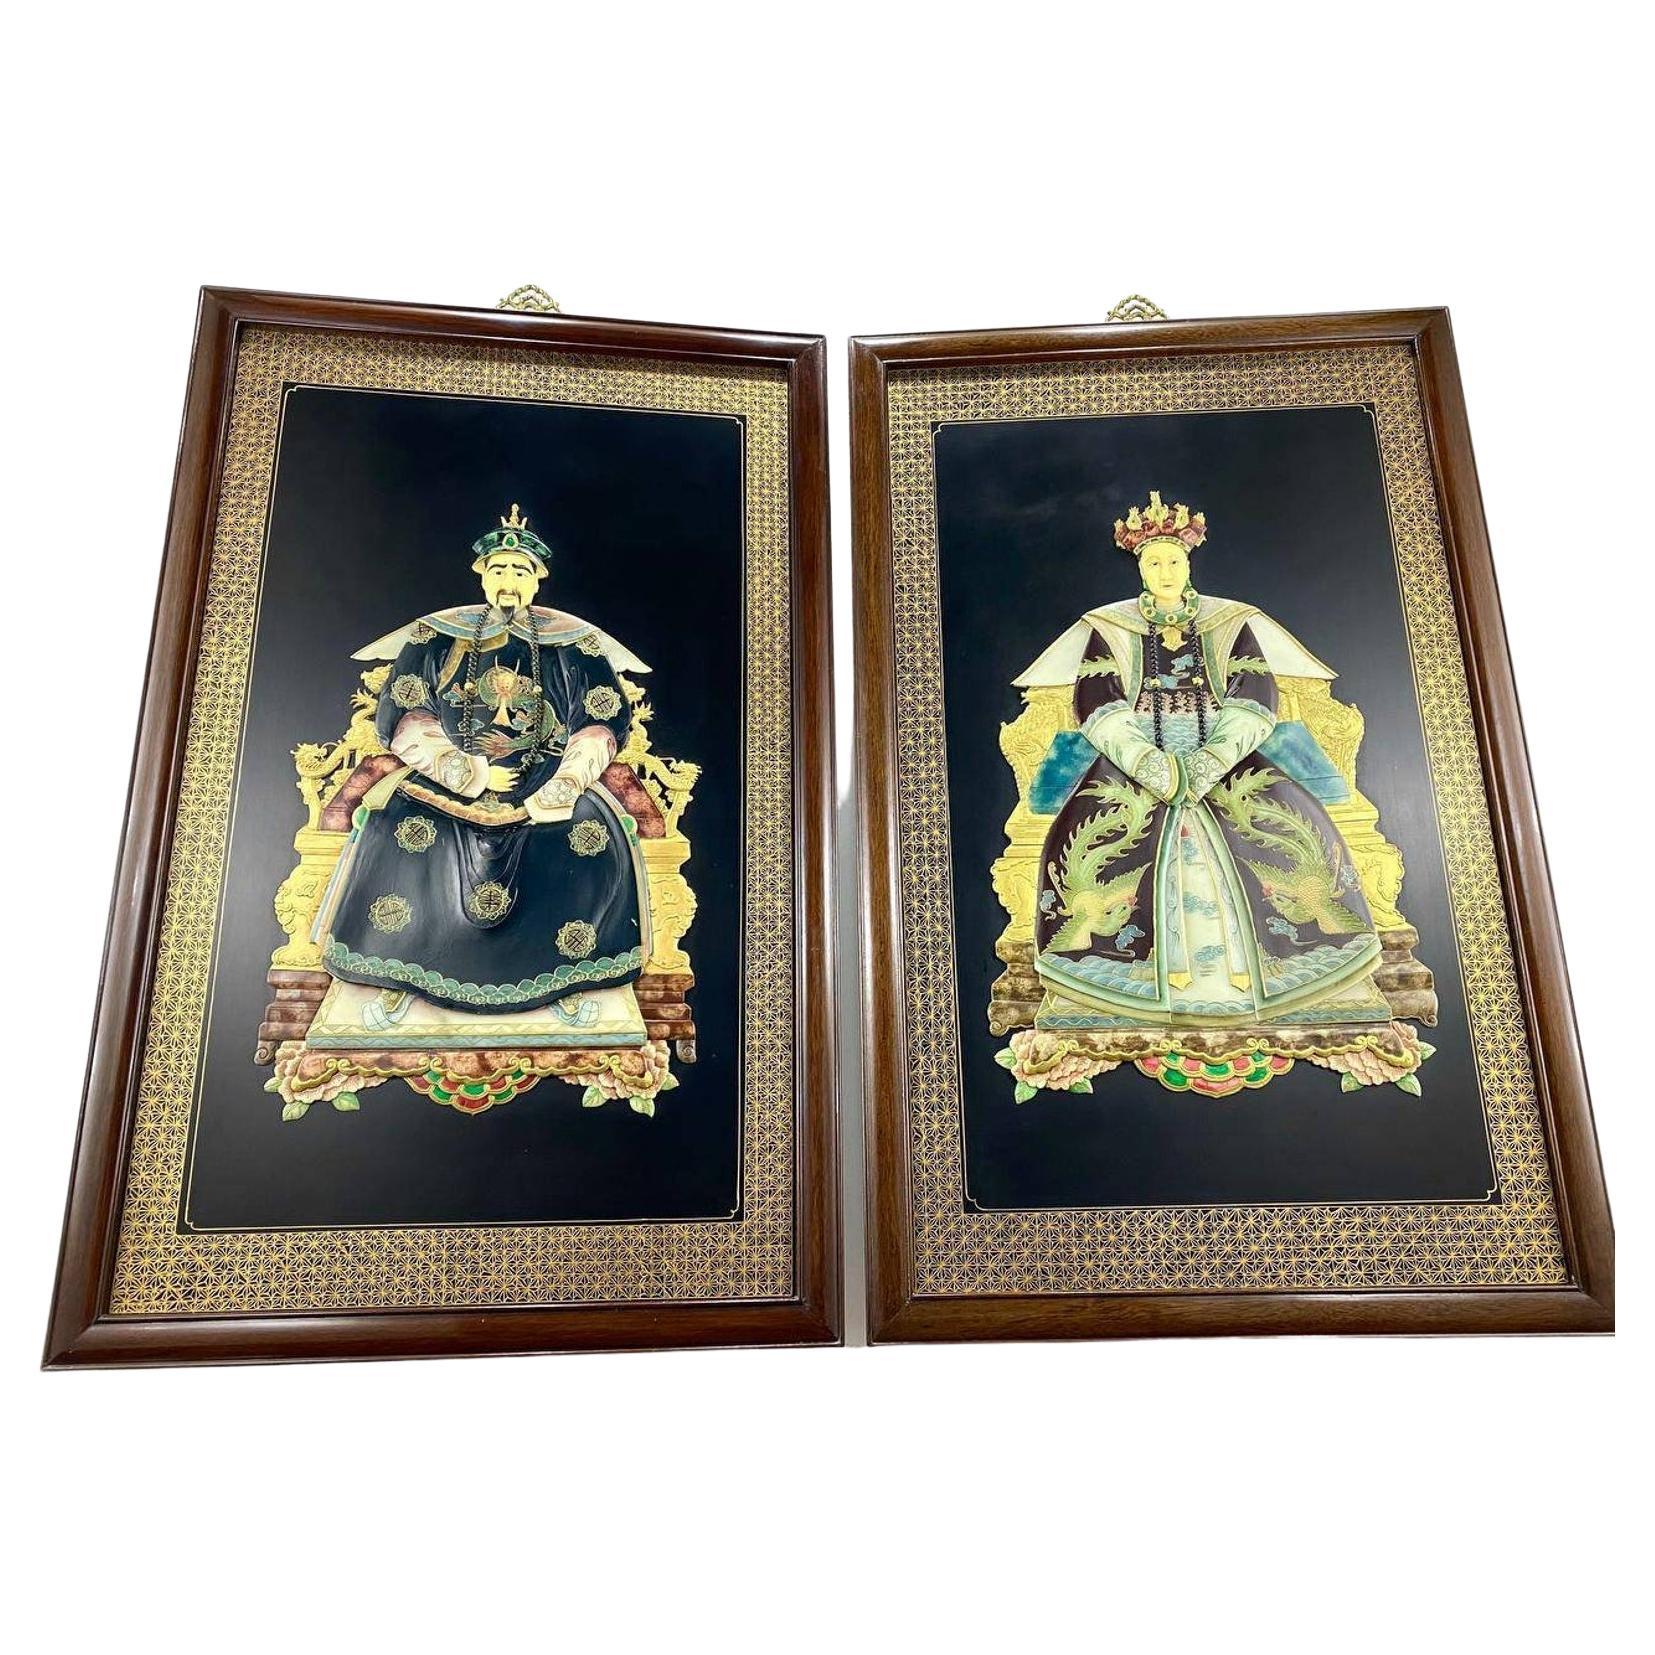 This is a spectacular set of hand-painted wooden wall panels in chinoiserie style representing the Emperor and Empress of the Qing Dynasty. 

 Hand-carved jade stone and hand-painted figures depict dignified Chinese ancestors in classic Ming style